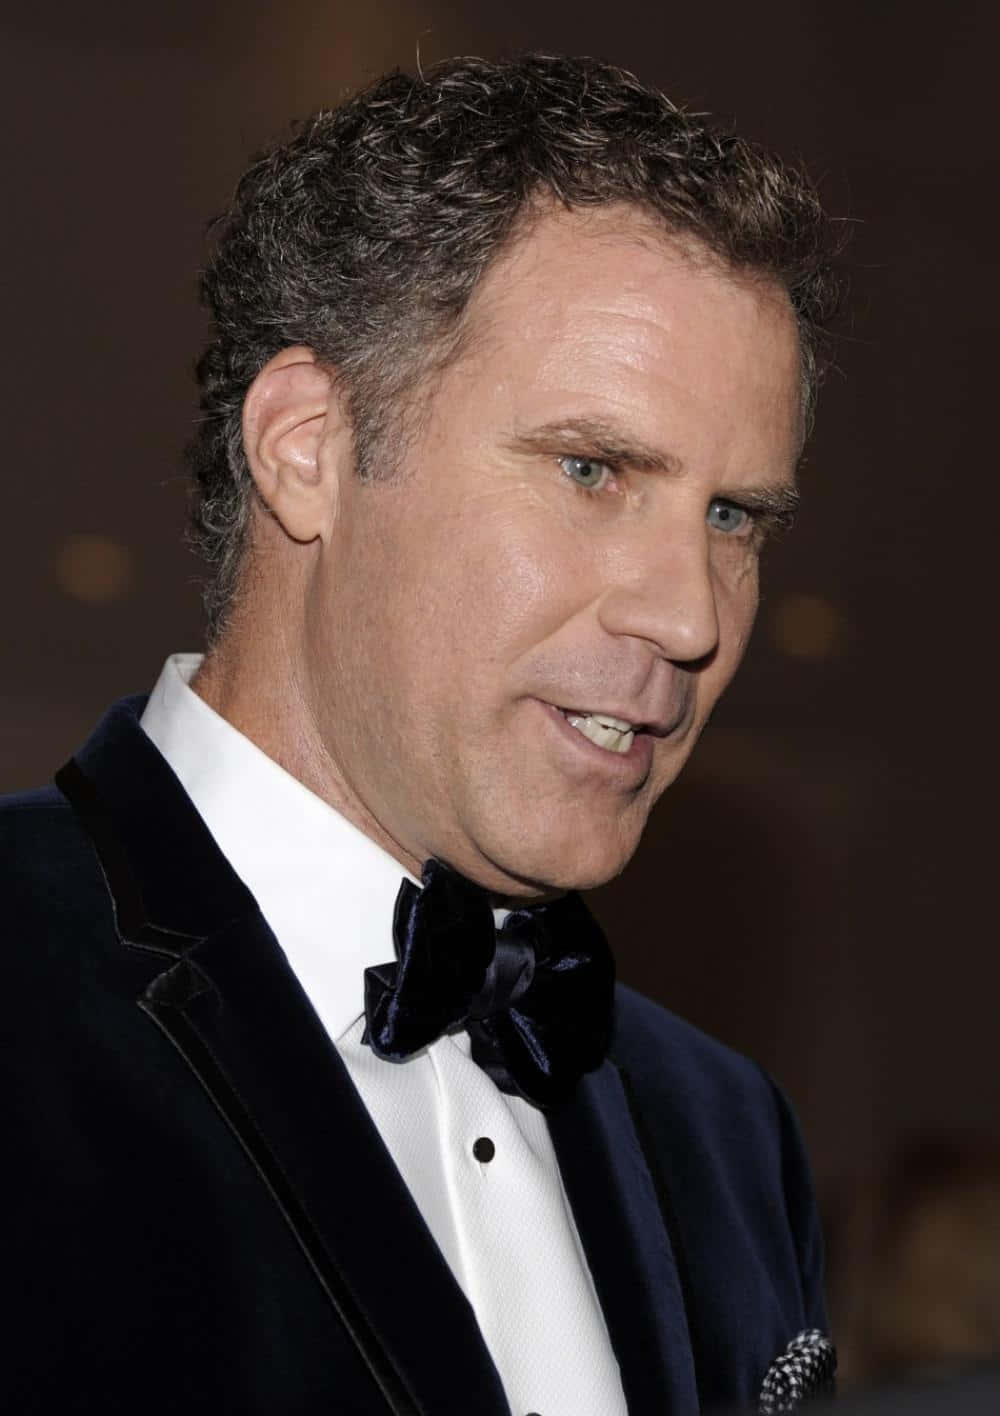 Will Ferrell posing with charisma Wallpaper